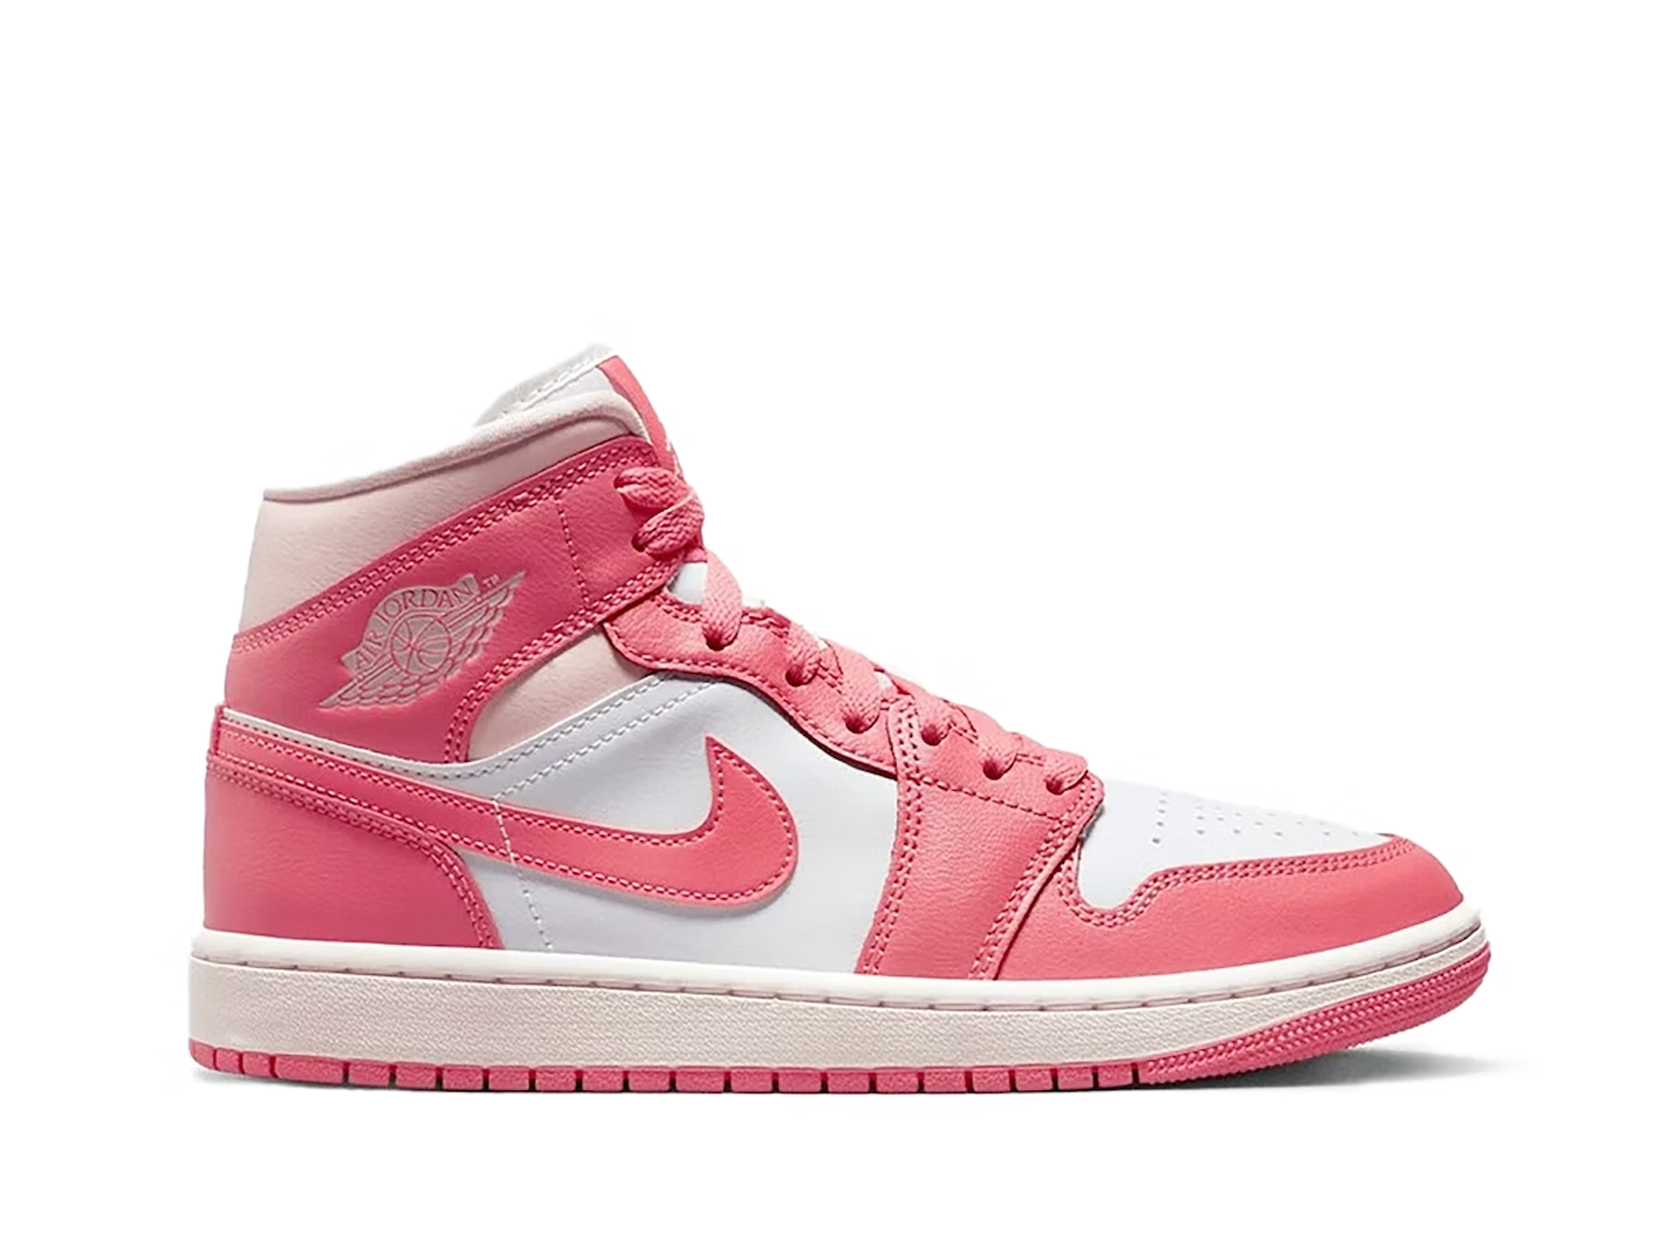 Double Boxed  199.99 Nike Air Jordan 1 Mid Strawberries & Cream Double Boxed